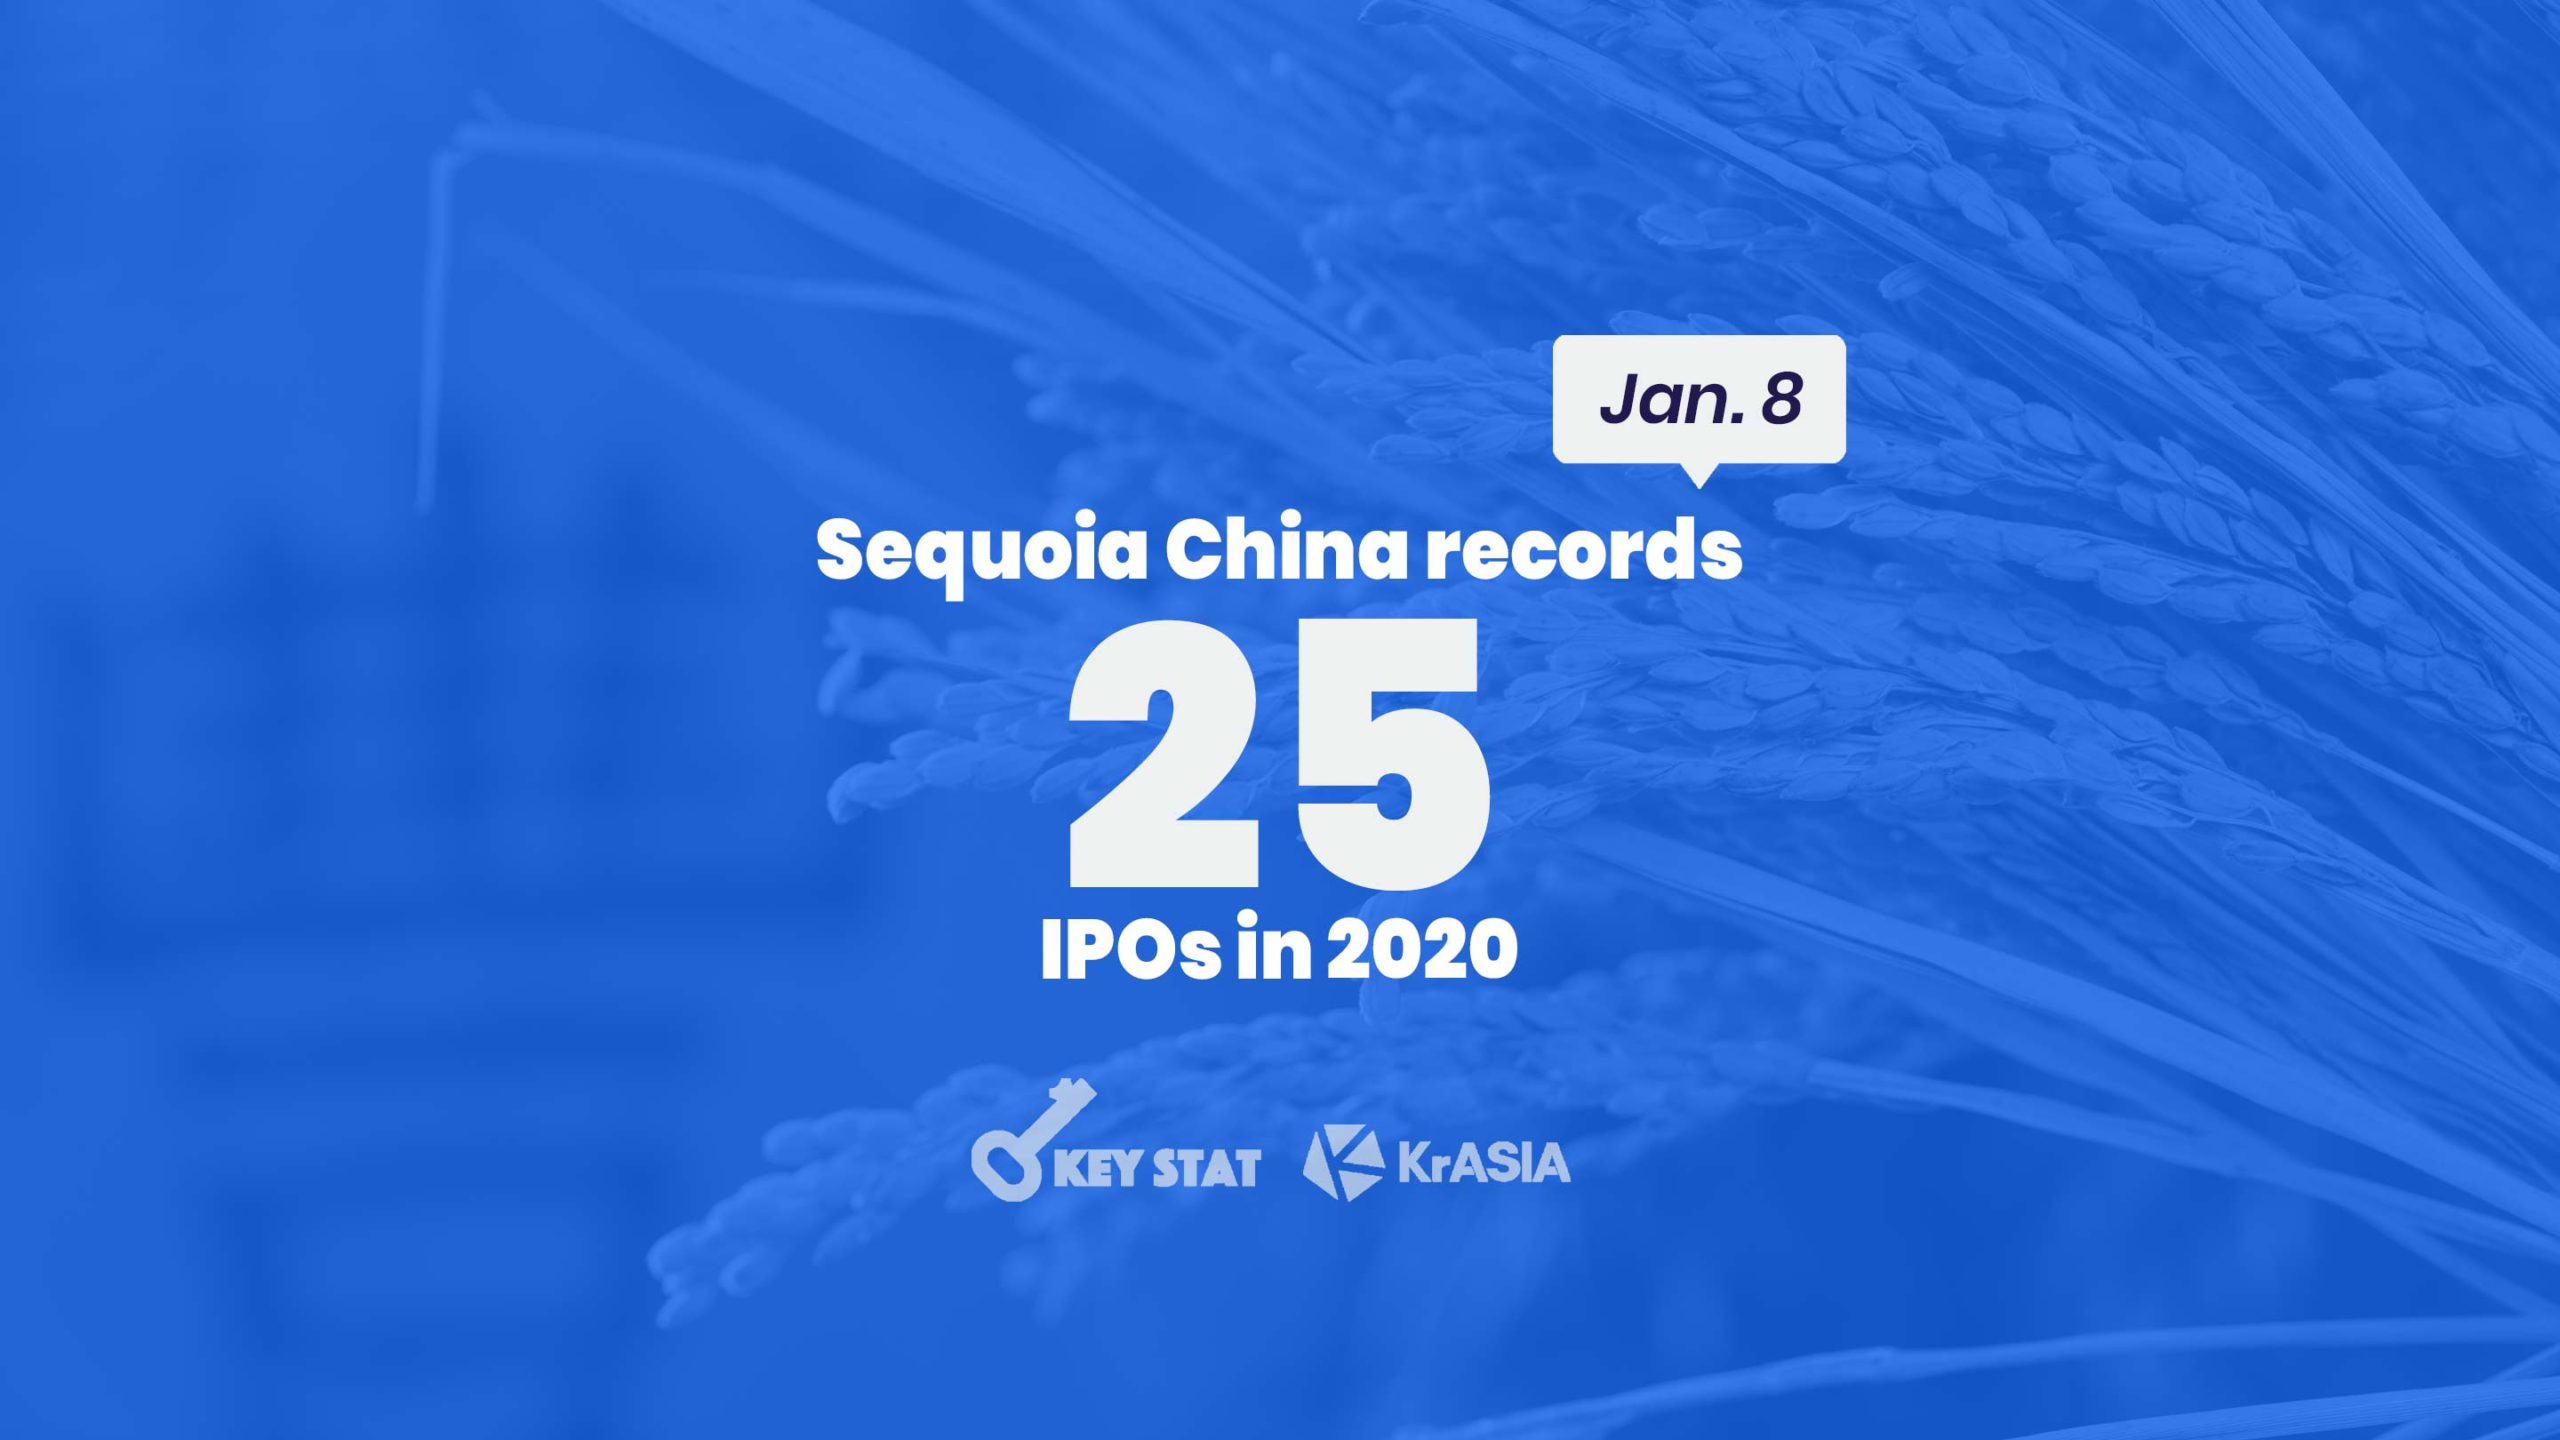 KEY STAT | It’s harvest season for Sequoia China and Hillhouse Capital